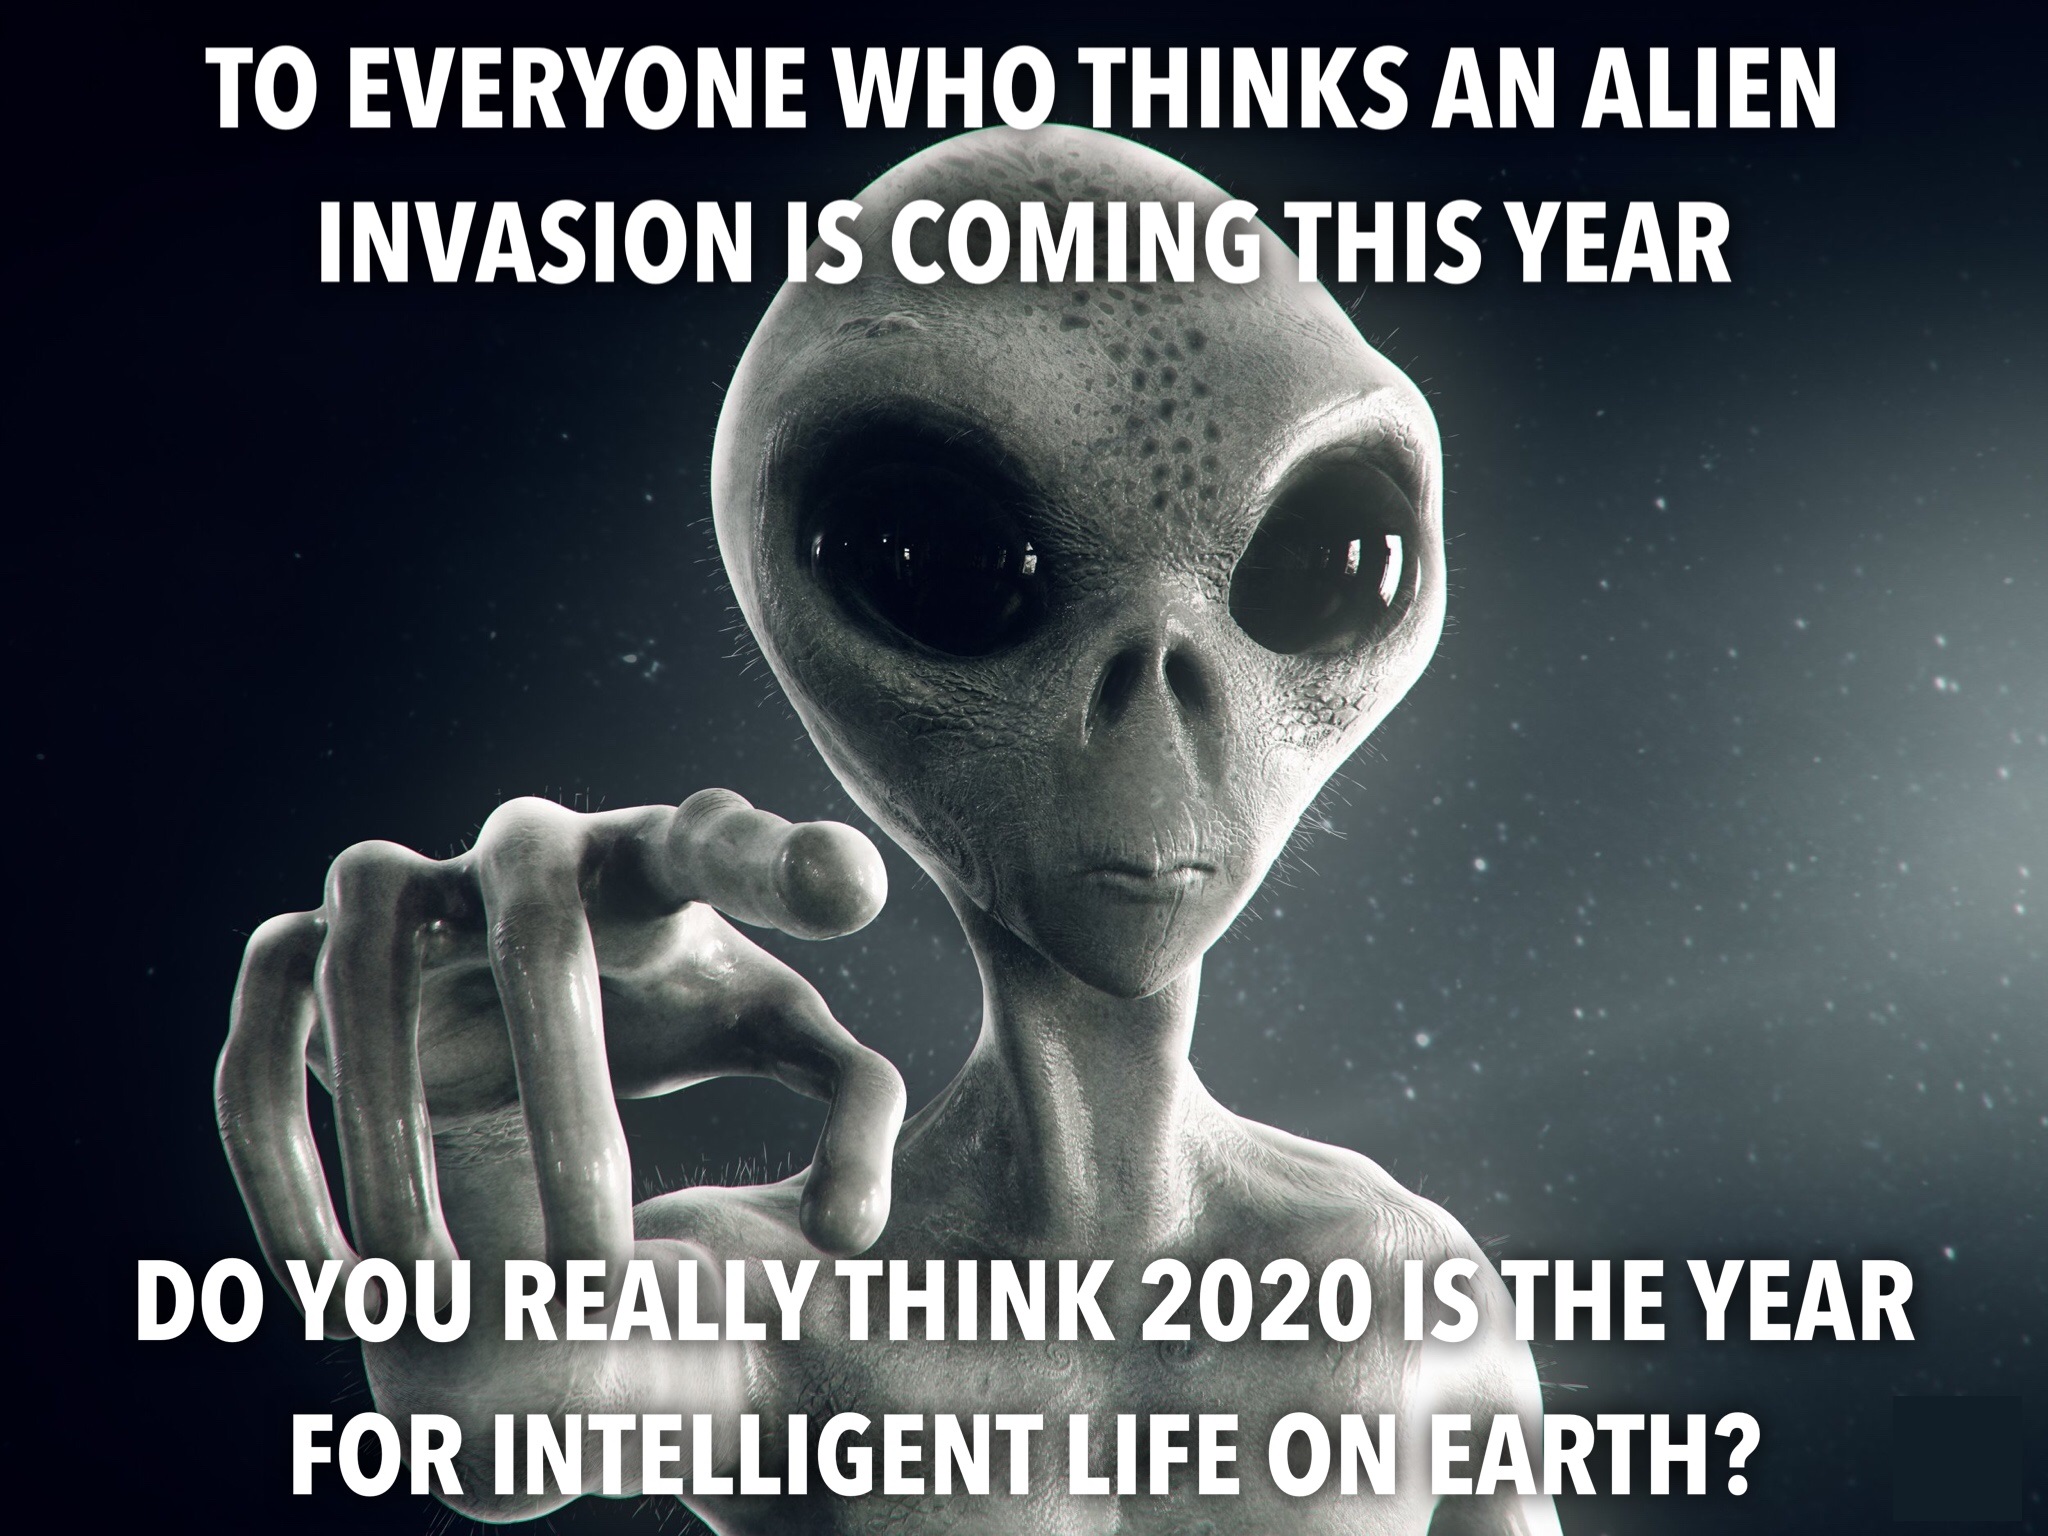 there aliens - To Everyone Who Thinks An Alien Invasion Is Coming This Year Do You Really Think 2020 Is The Year For Intelligent Life On Earth?